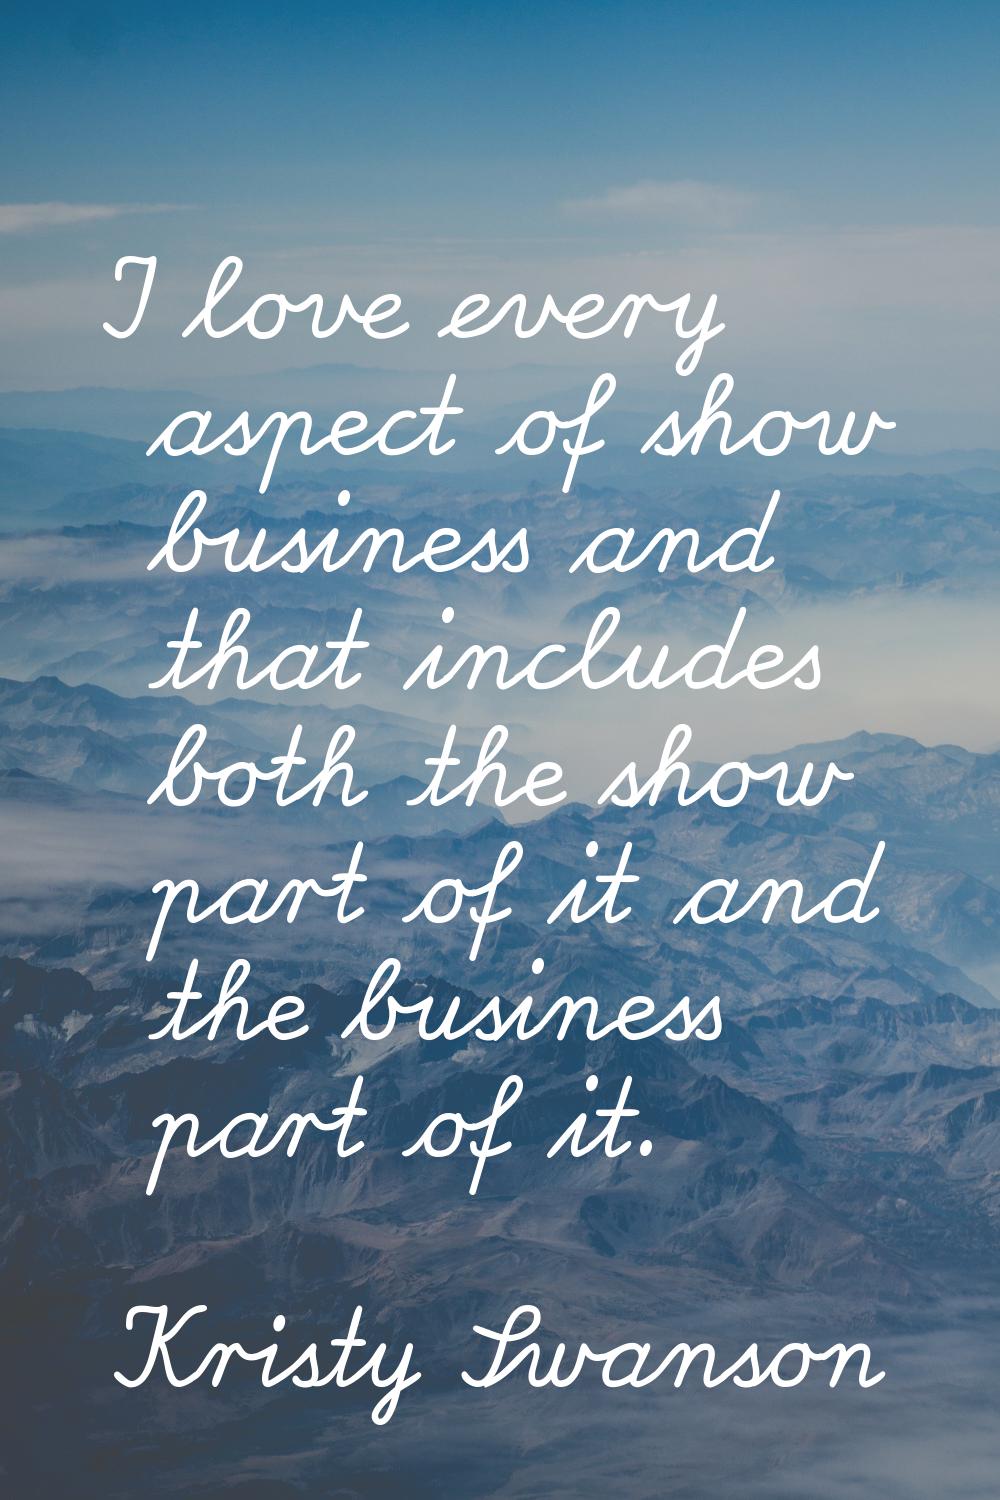 I love every aspect of show business and that includes both the show part of it and the business pa